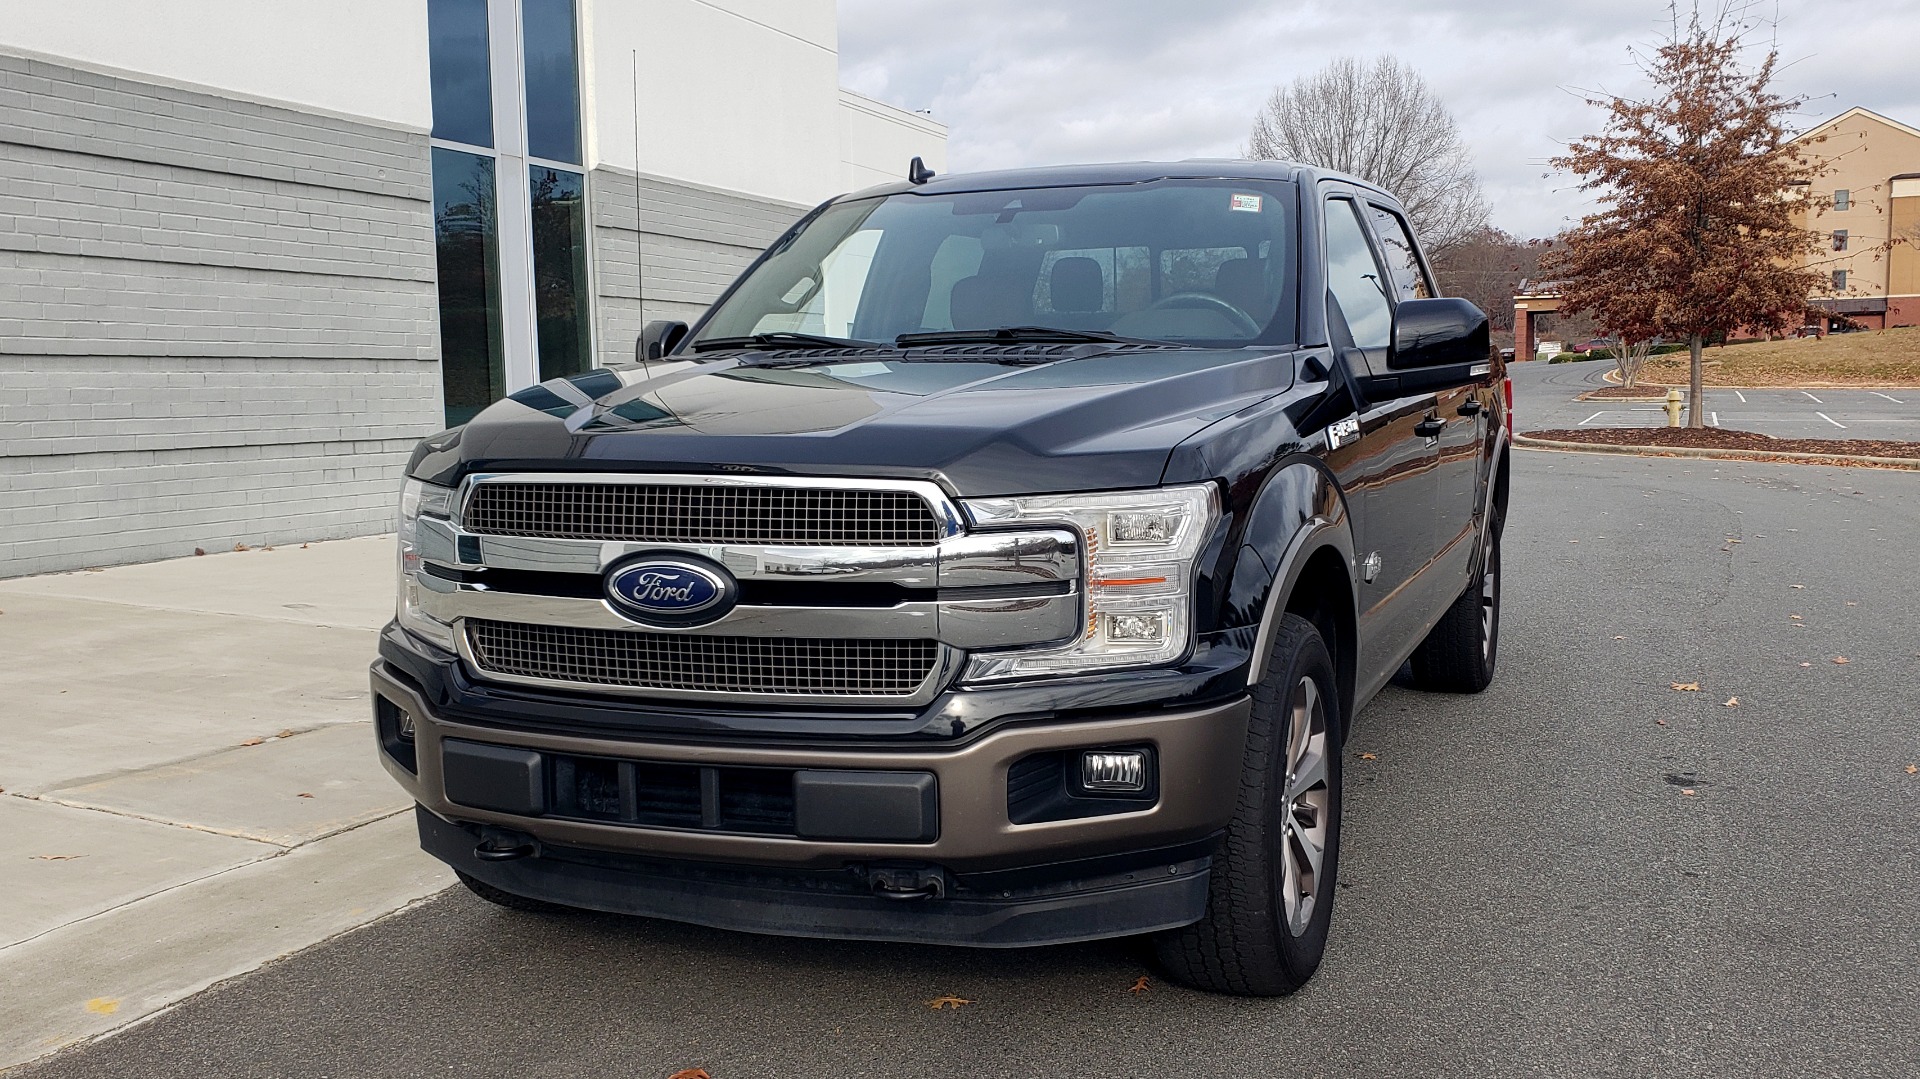 Used 2020 Ford F-150 KING RANCH 4X4 SUPERCREW / 3.5L ECOBOOST / B&O SND / REARVIEW for sale $53,995 at Formula Imports in Charlotte NC 28227 2